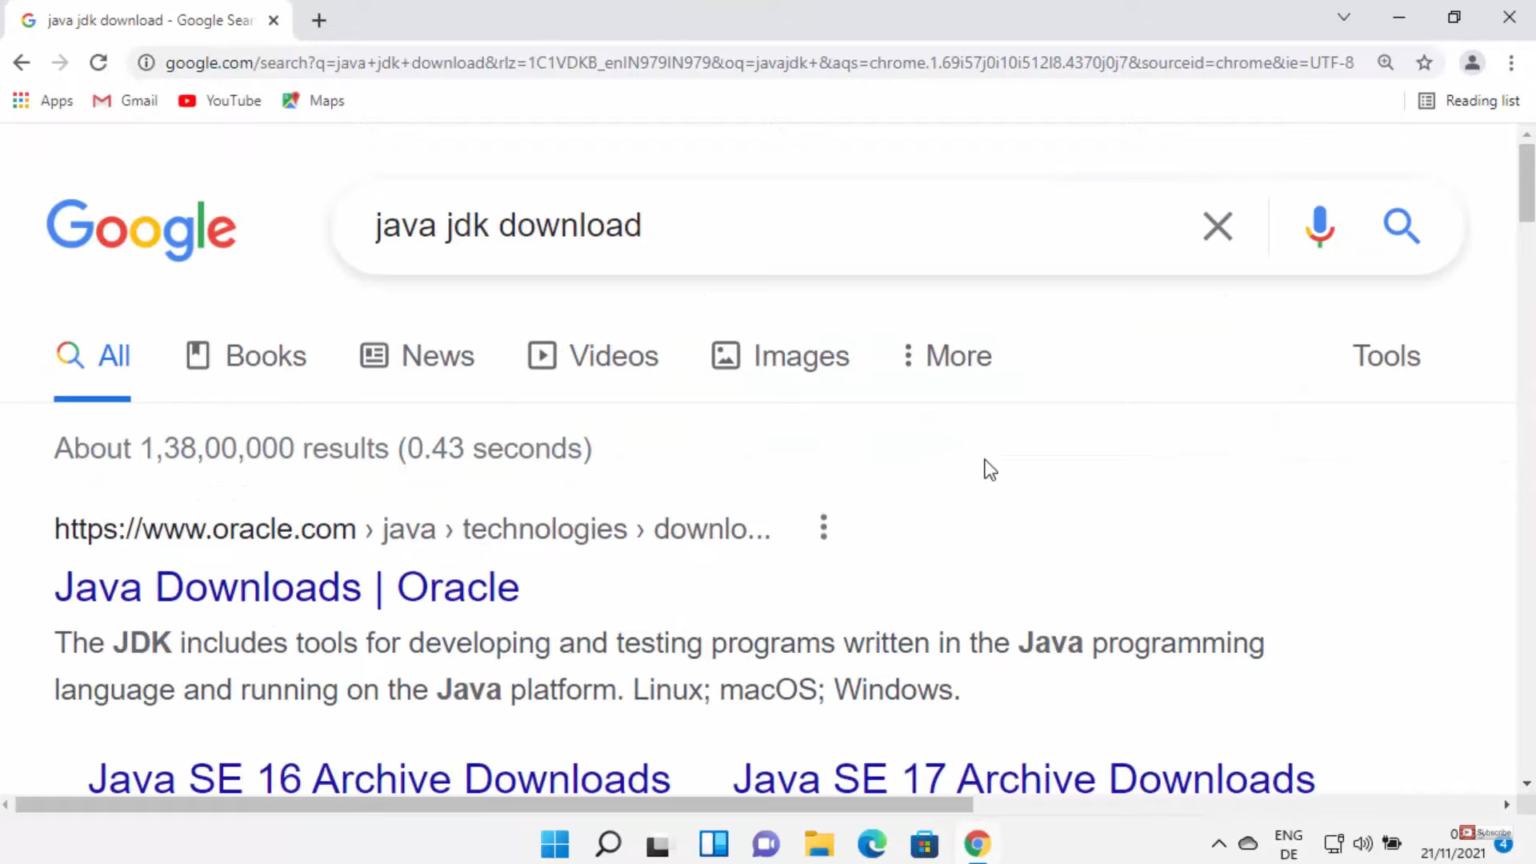 Create your first Java application